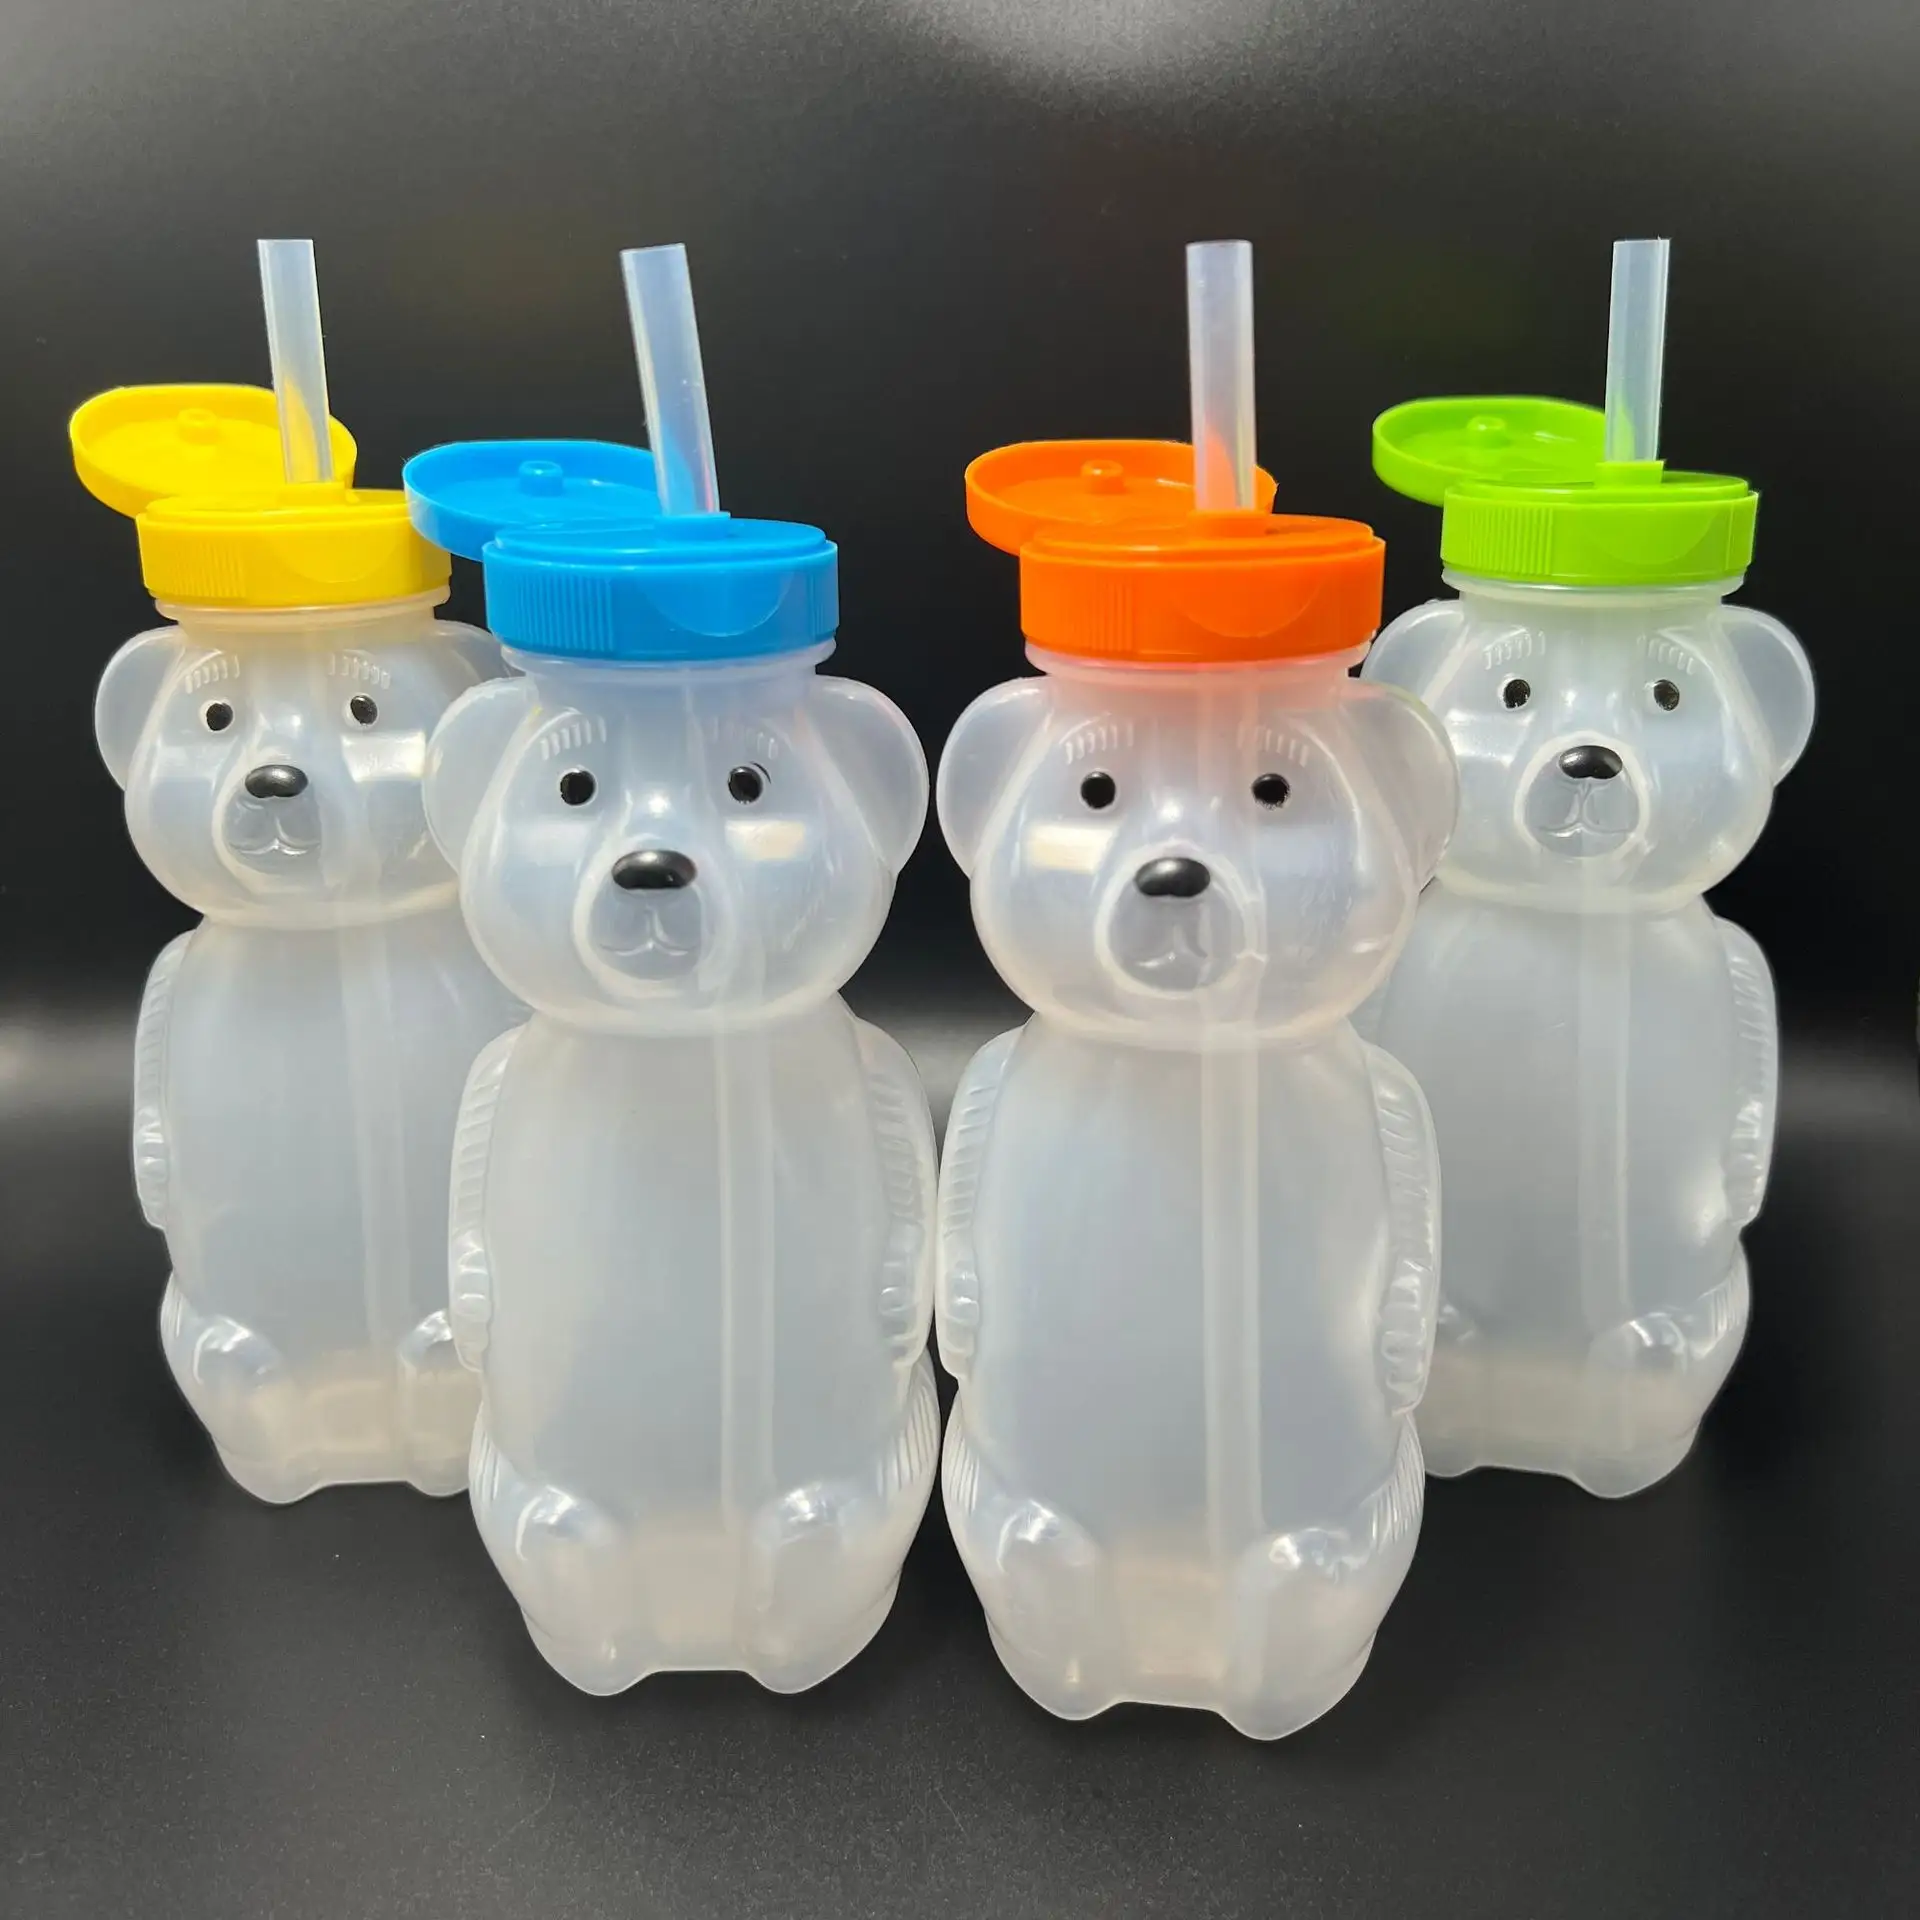 Honey Bear Straw Cup for Baby BPA FREE LDPE squeeze 8oz bear-shaped cup with screw cap Straw learning therapy with custom box